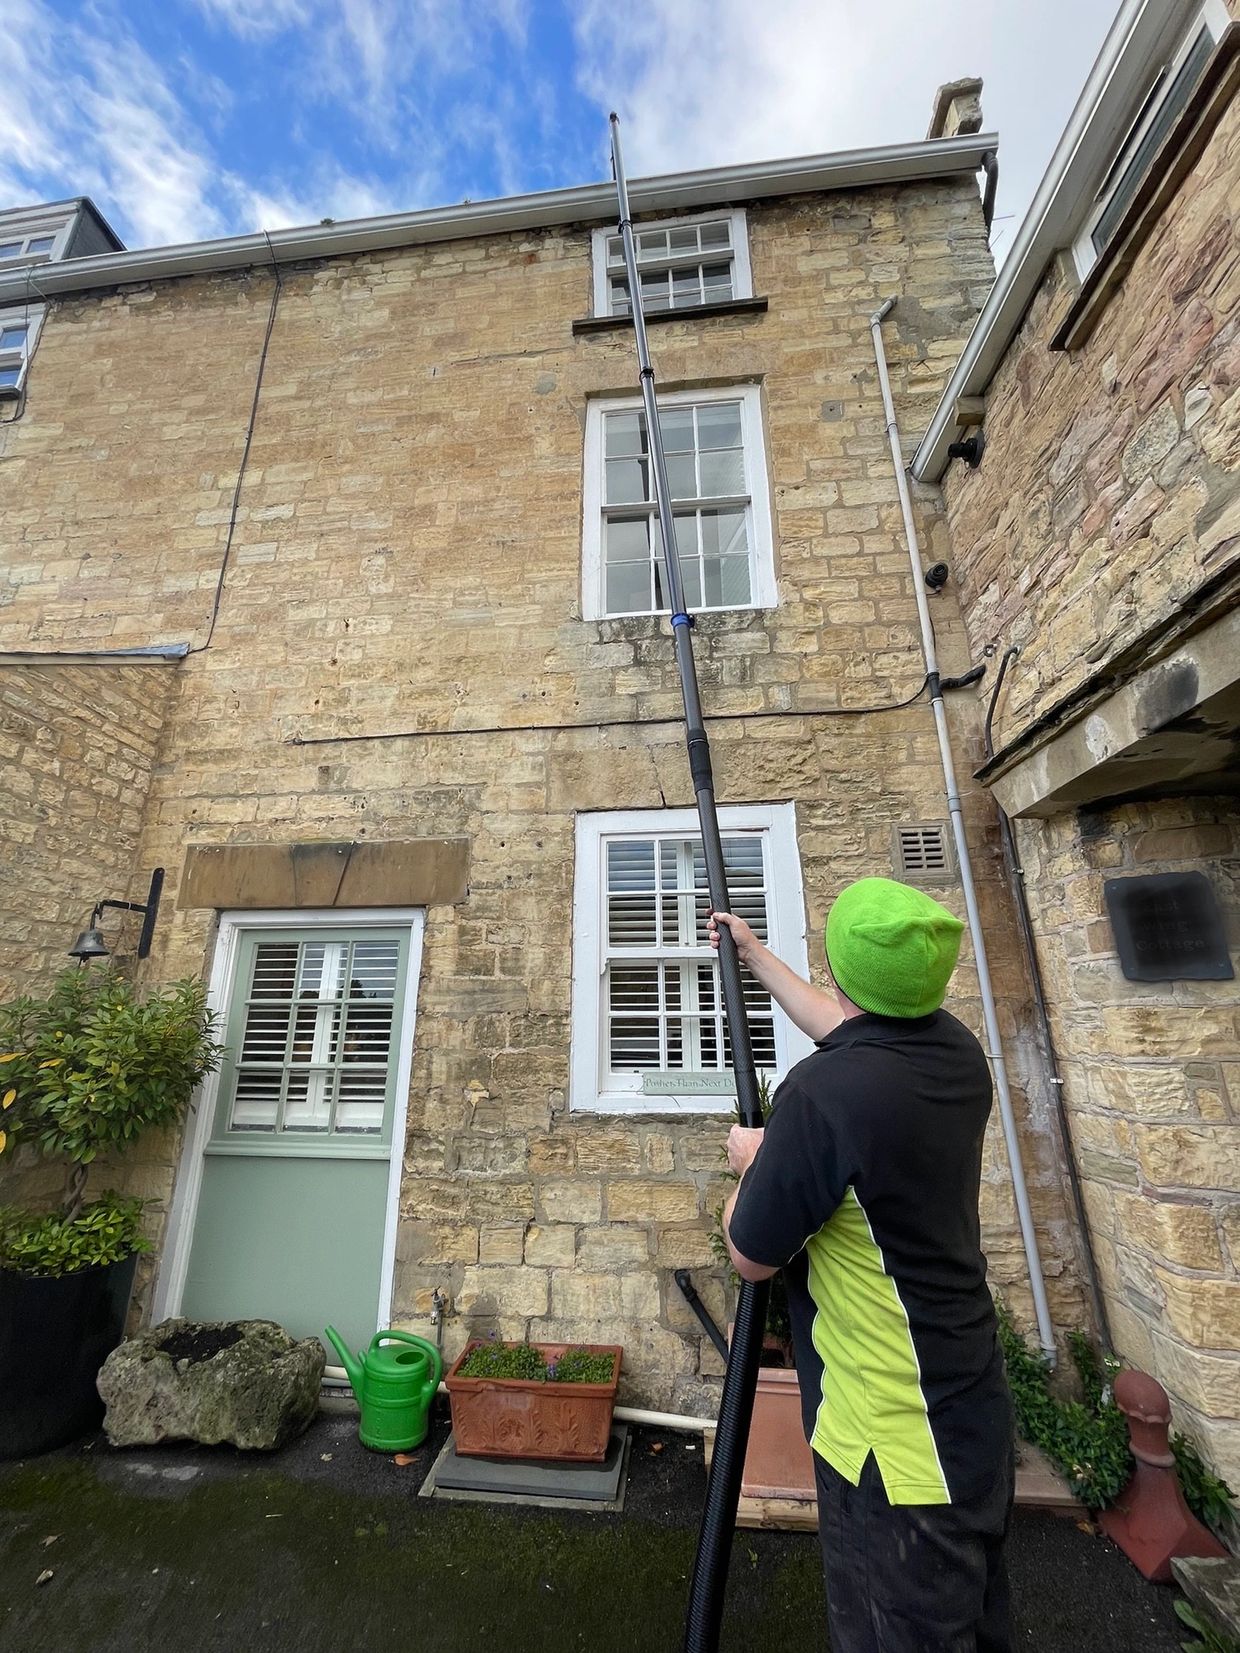 Gutter cleaning in Leeds carried out safely using a gutter vacuum system.